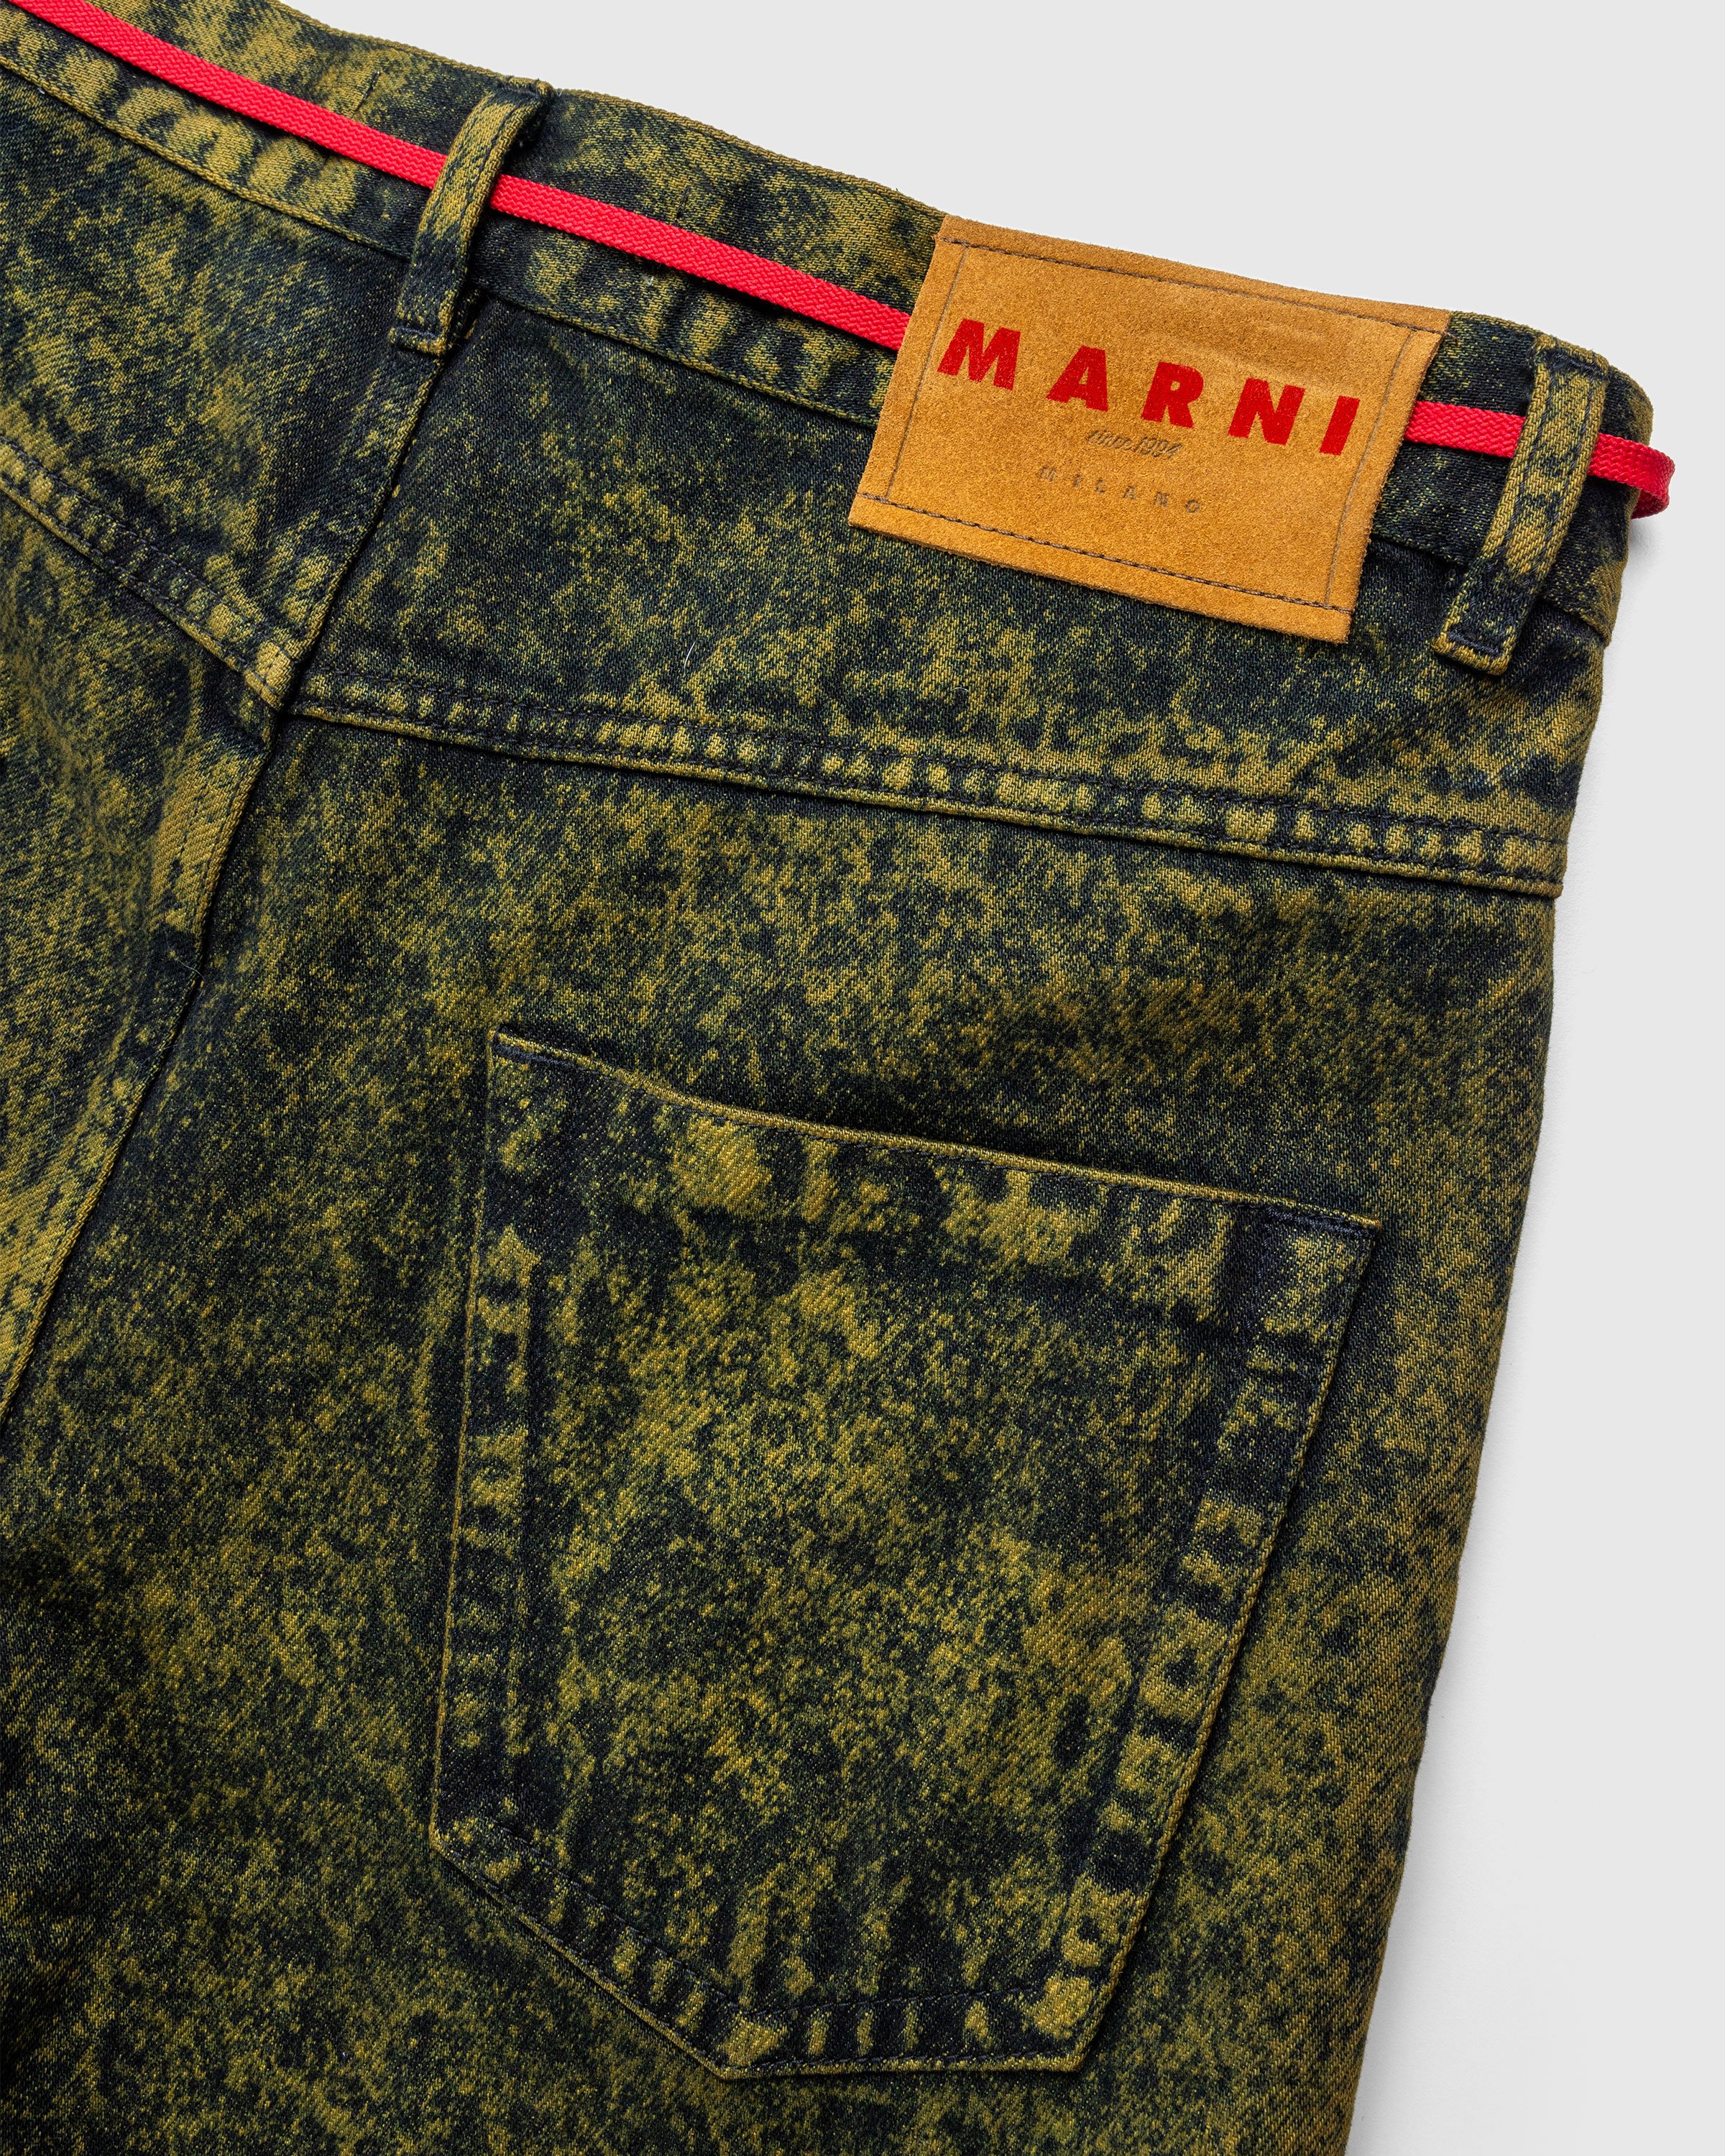 Marni - Trousers Green - Clothing - Green - Image 7